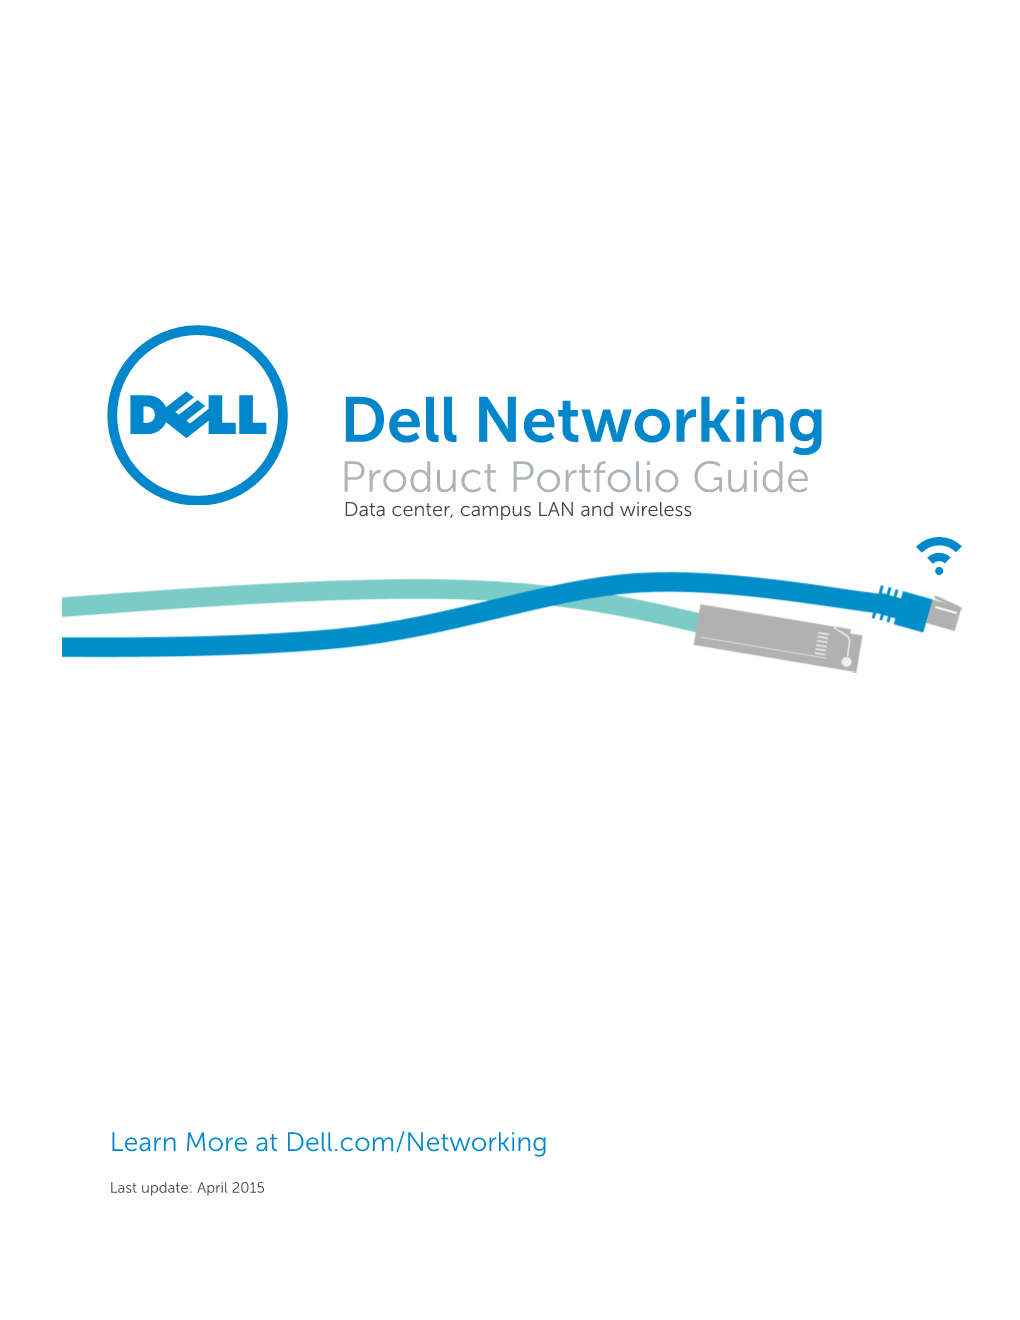 Dell Networking Product Portfolio Guide Data Center, Campus LAN and Wireless